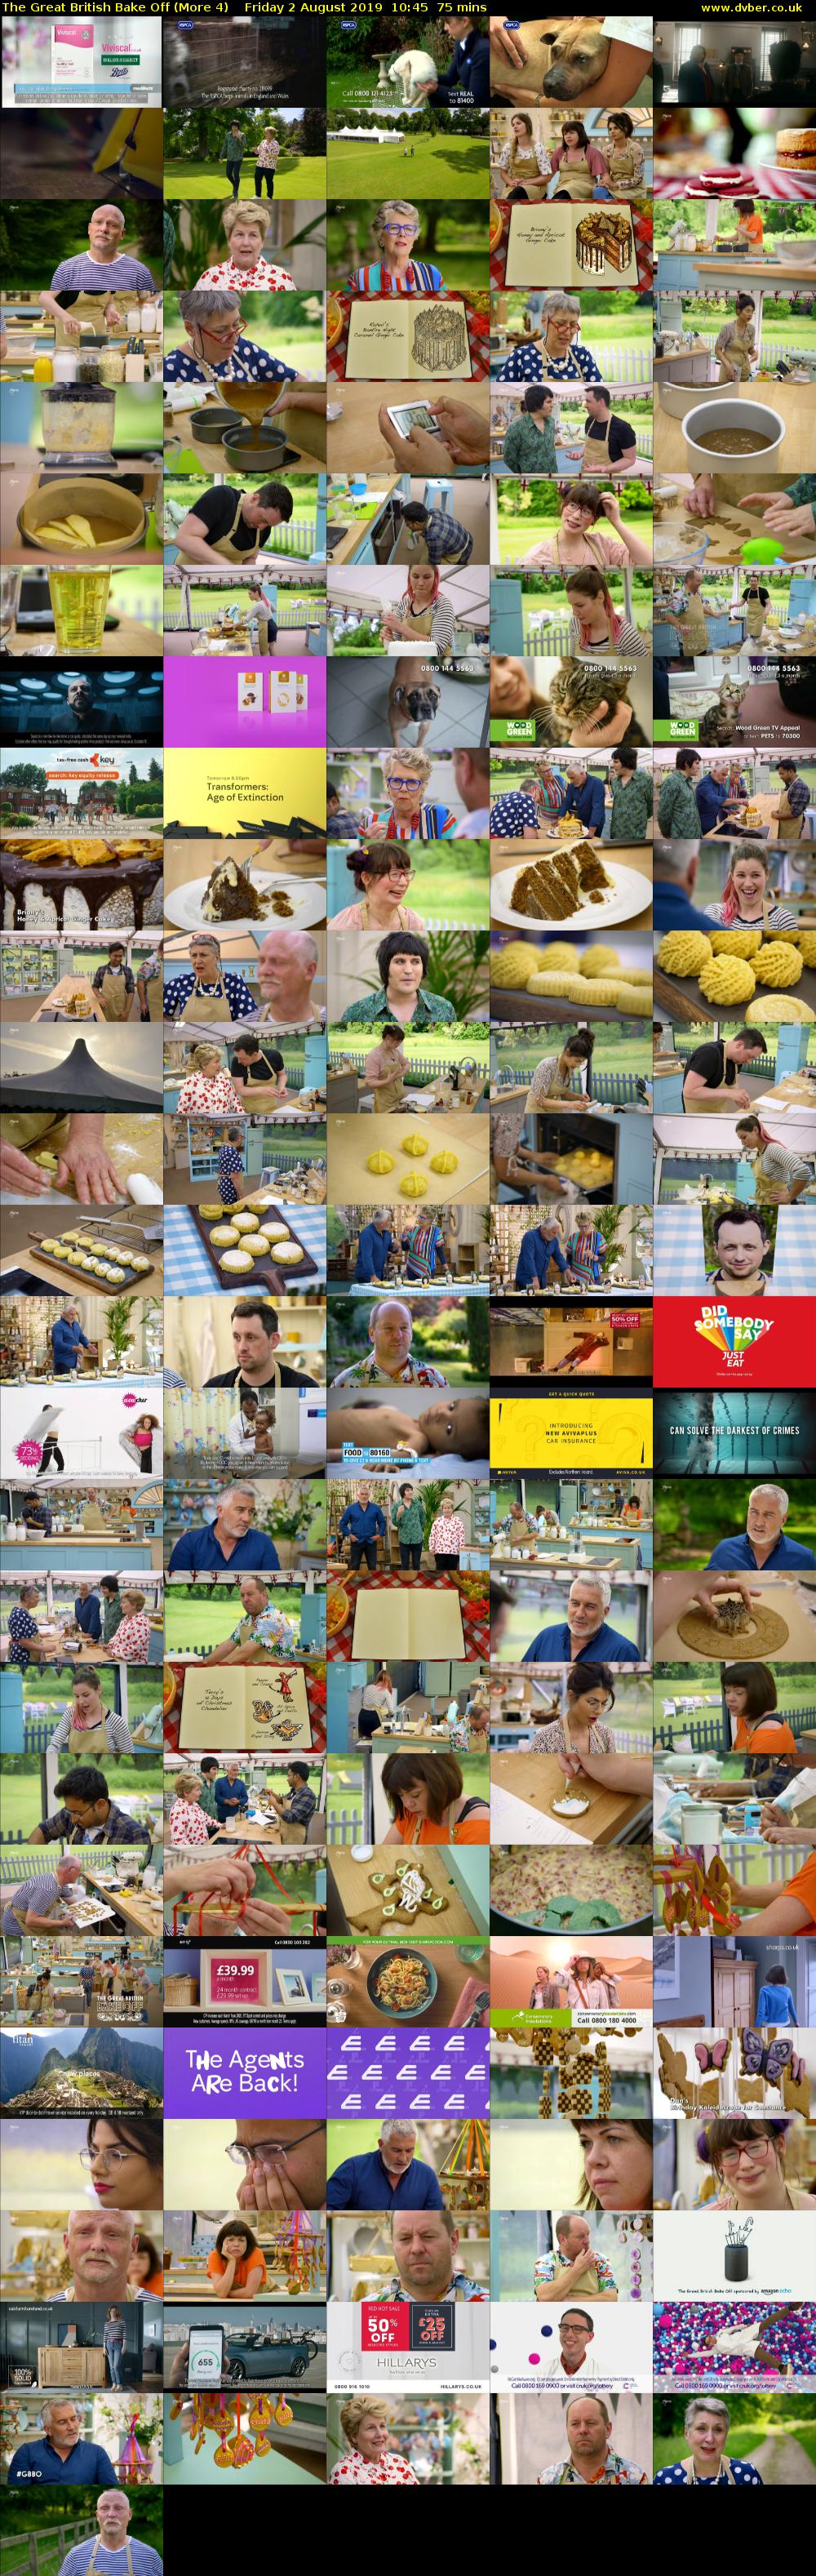 The Great British Bake Off (More 4) Friday 2 August 2019 10:45 - 12:00